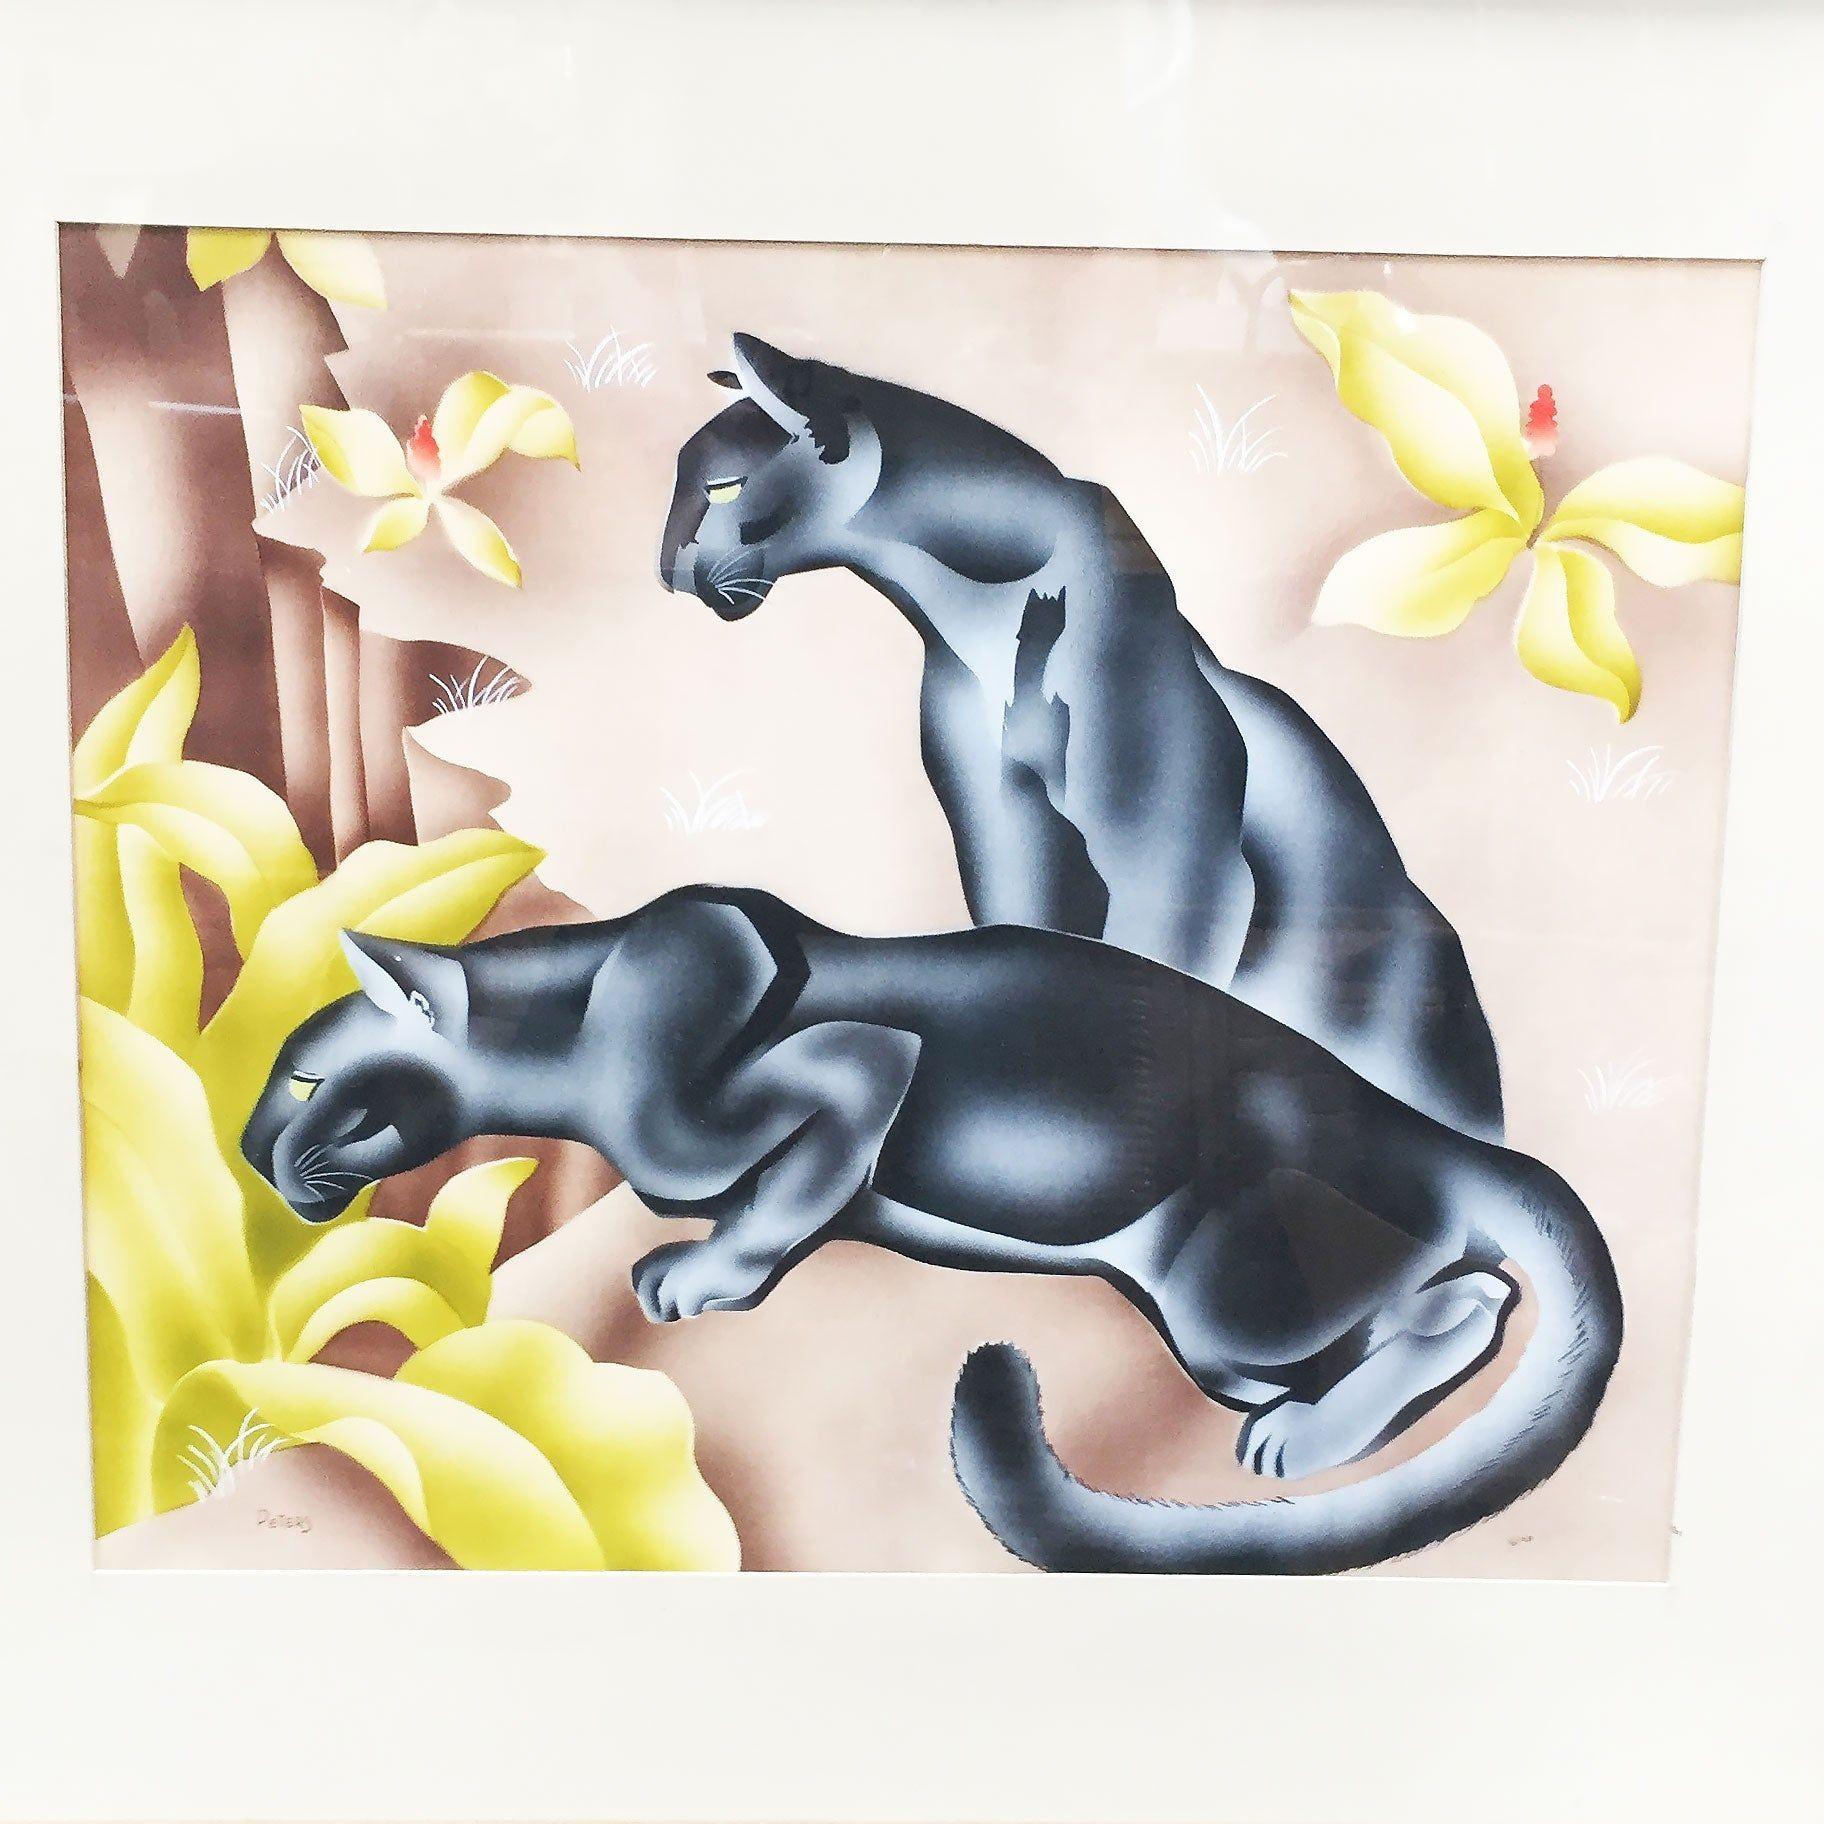 Mid-century era tropical airbrush artwork watercolor panther painting on paper. Signed Peters.

Measures: Frame 35